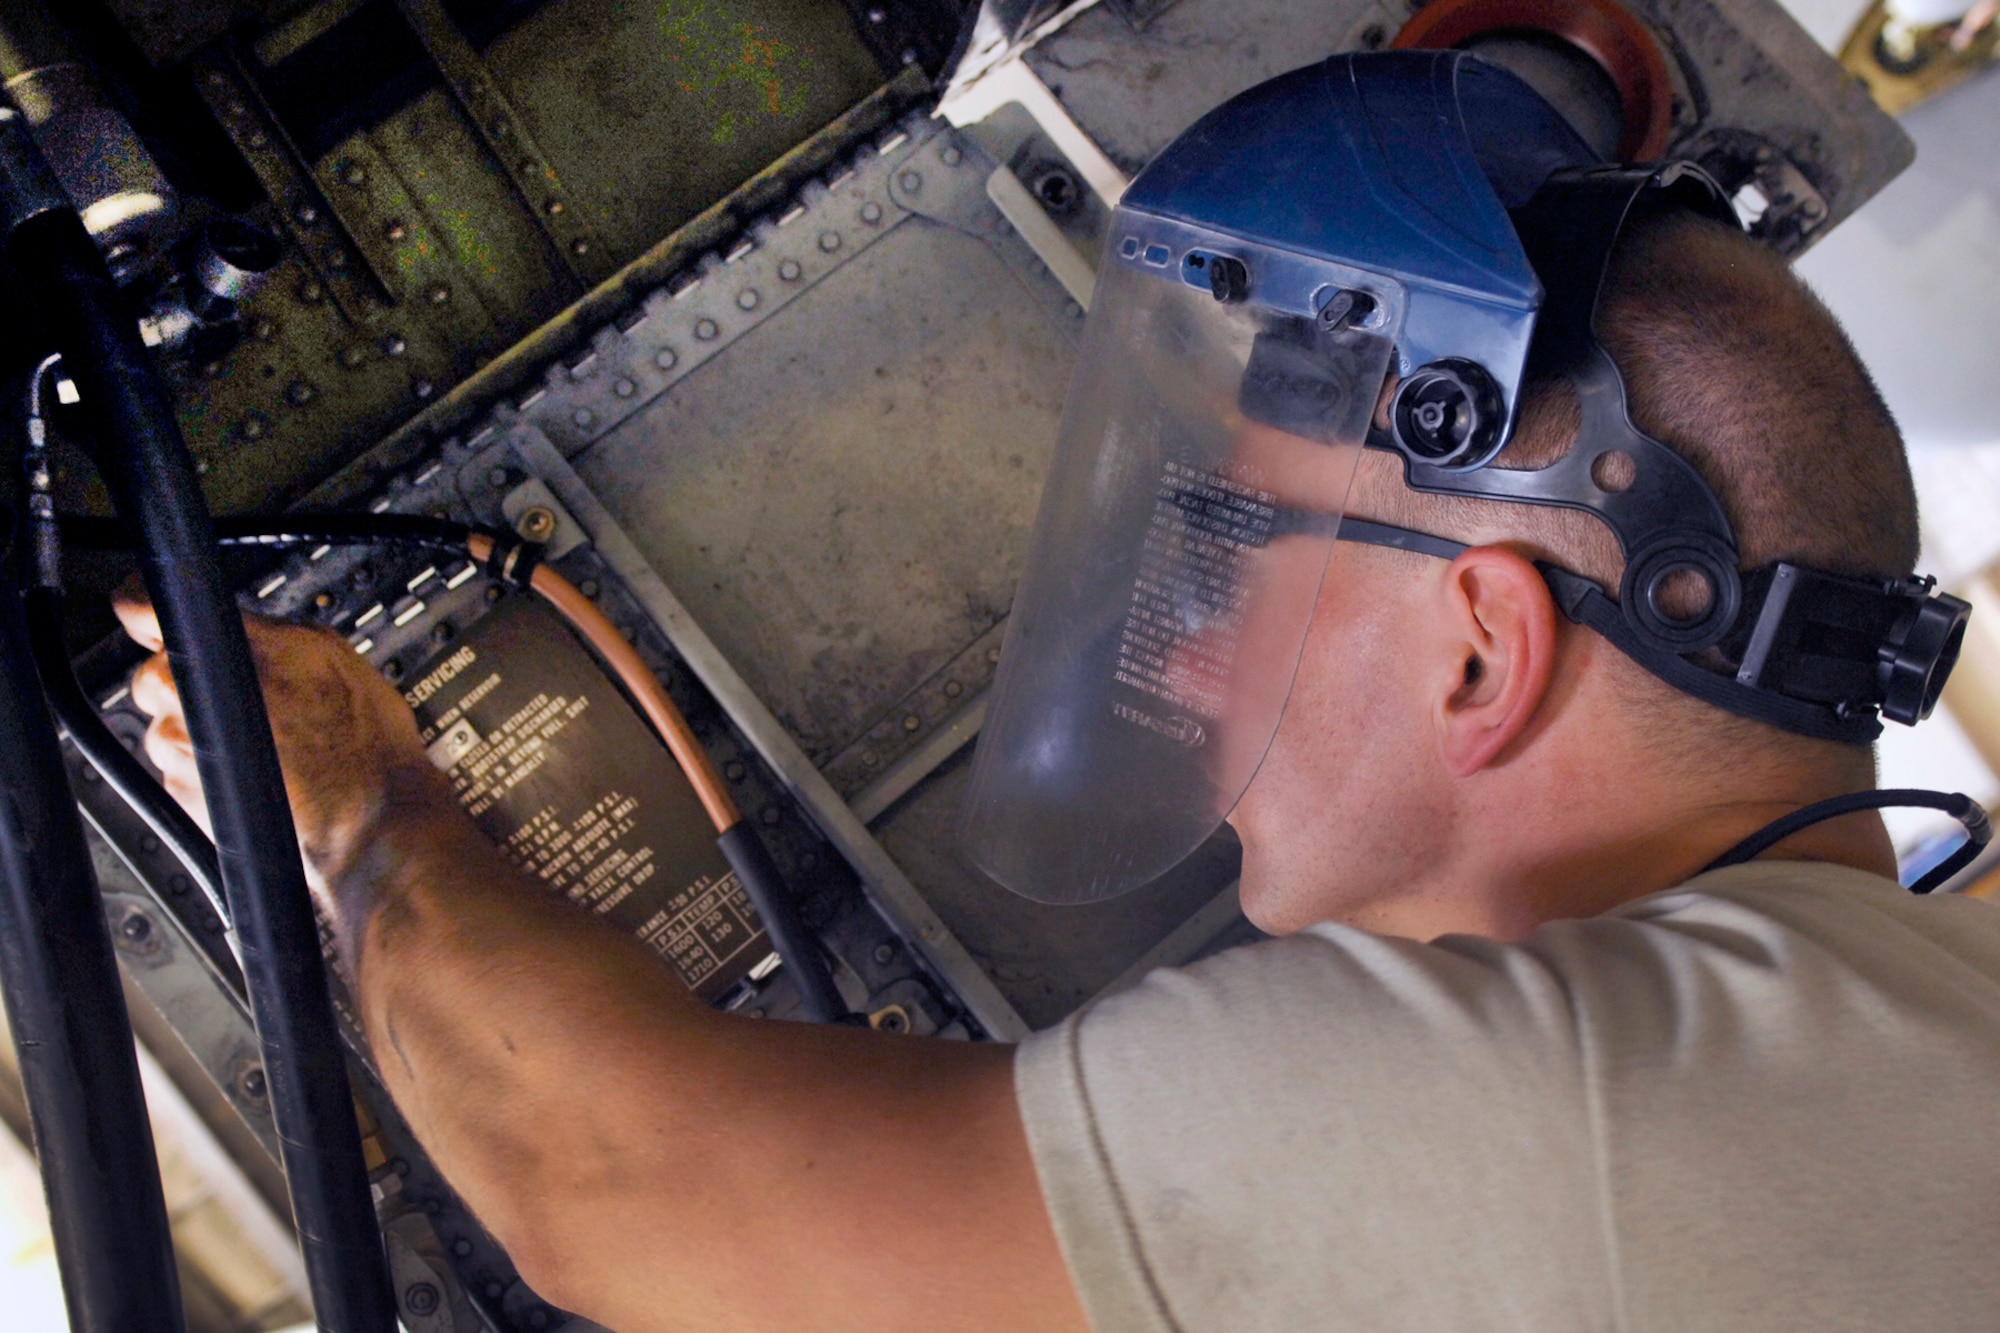 Senior Airman William Fine, an aircraft phase maintenance specialist with the 188th Fighter Wing deployed with the 455th Expeditionary Maintenance Squadron, adjusts the bootstrap accumulator on an A-10 Thunderbolt II during a seven-level inspection at Bagram Airfield, Afghanistan, Aug. 9, 2012. Each time an A-10 accomplishes 500 flying hours, the maintainers put the aircraft through a periodic maintenance phase, which lasts approximately four to five days. During this time, the maintainers give the aircraft a complete overhaul, looking for foreign object debris, damage, cracked or worn parts. They also ensure that every section of the airframe is intact with each piece in place. (U.S. Air Force photo by Staff Sgt. Jeff Nevison)